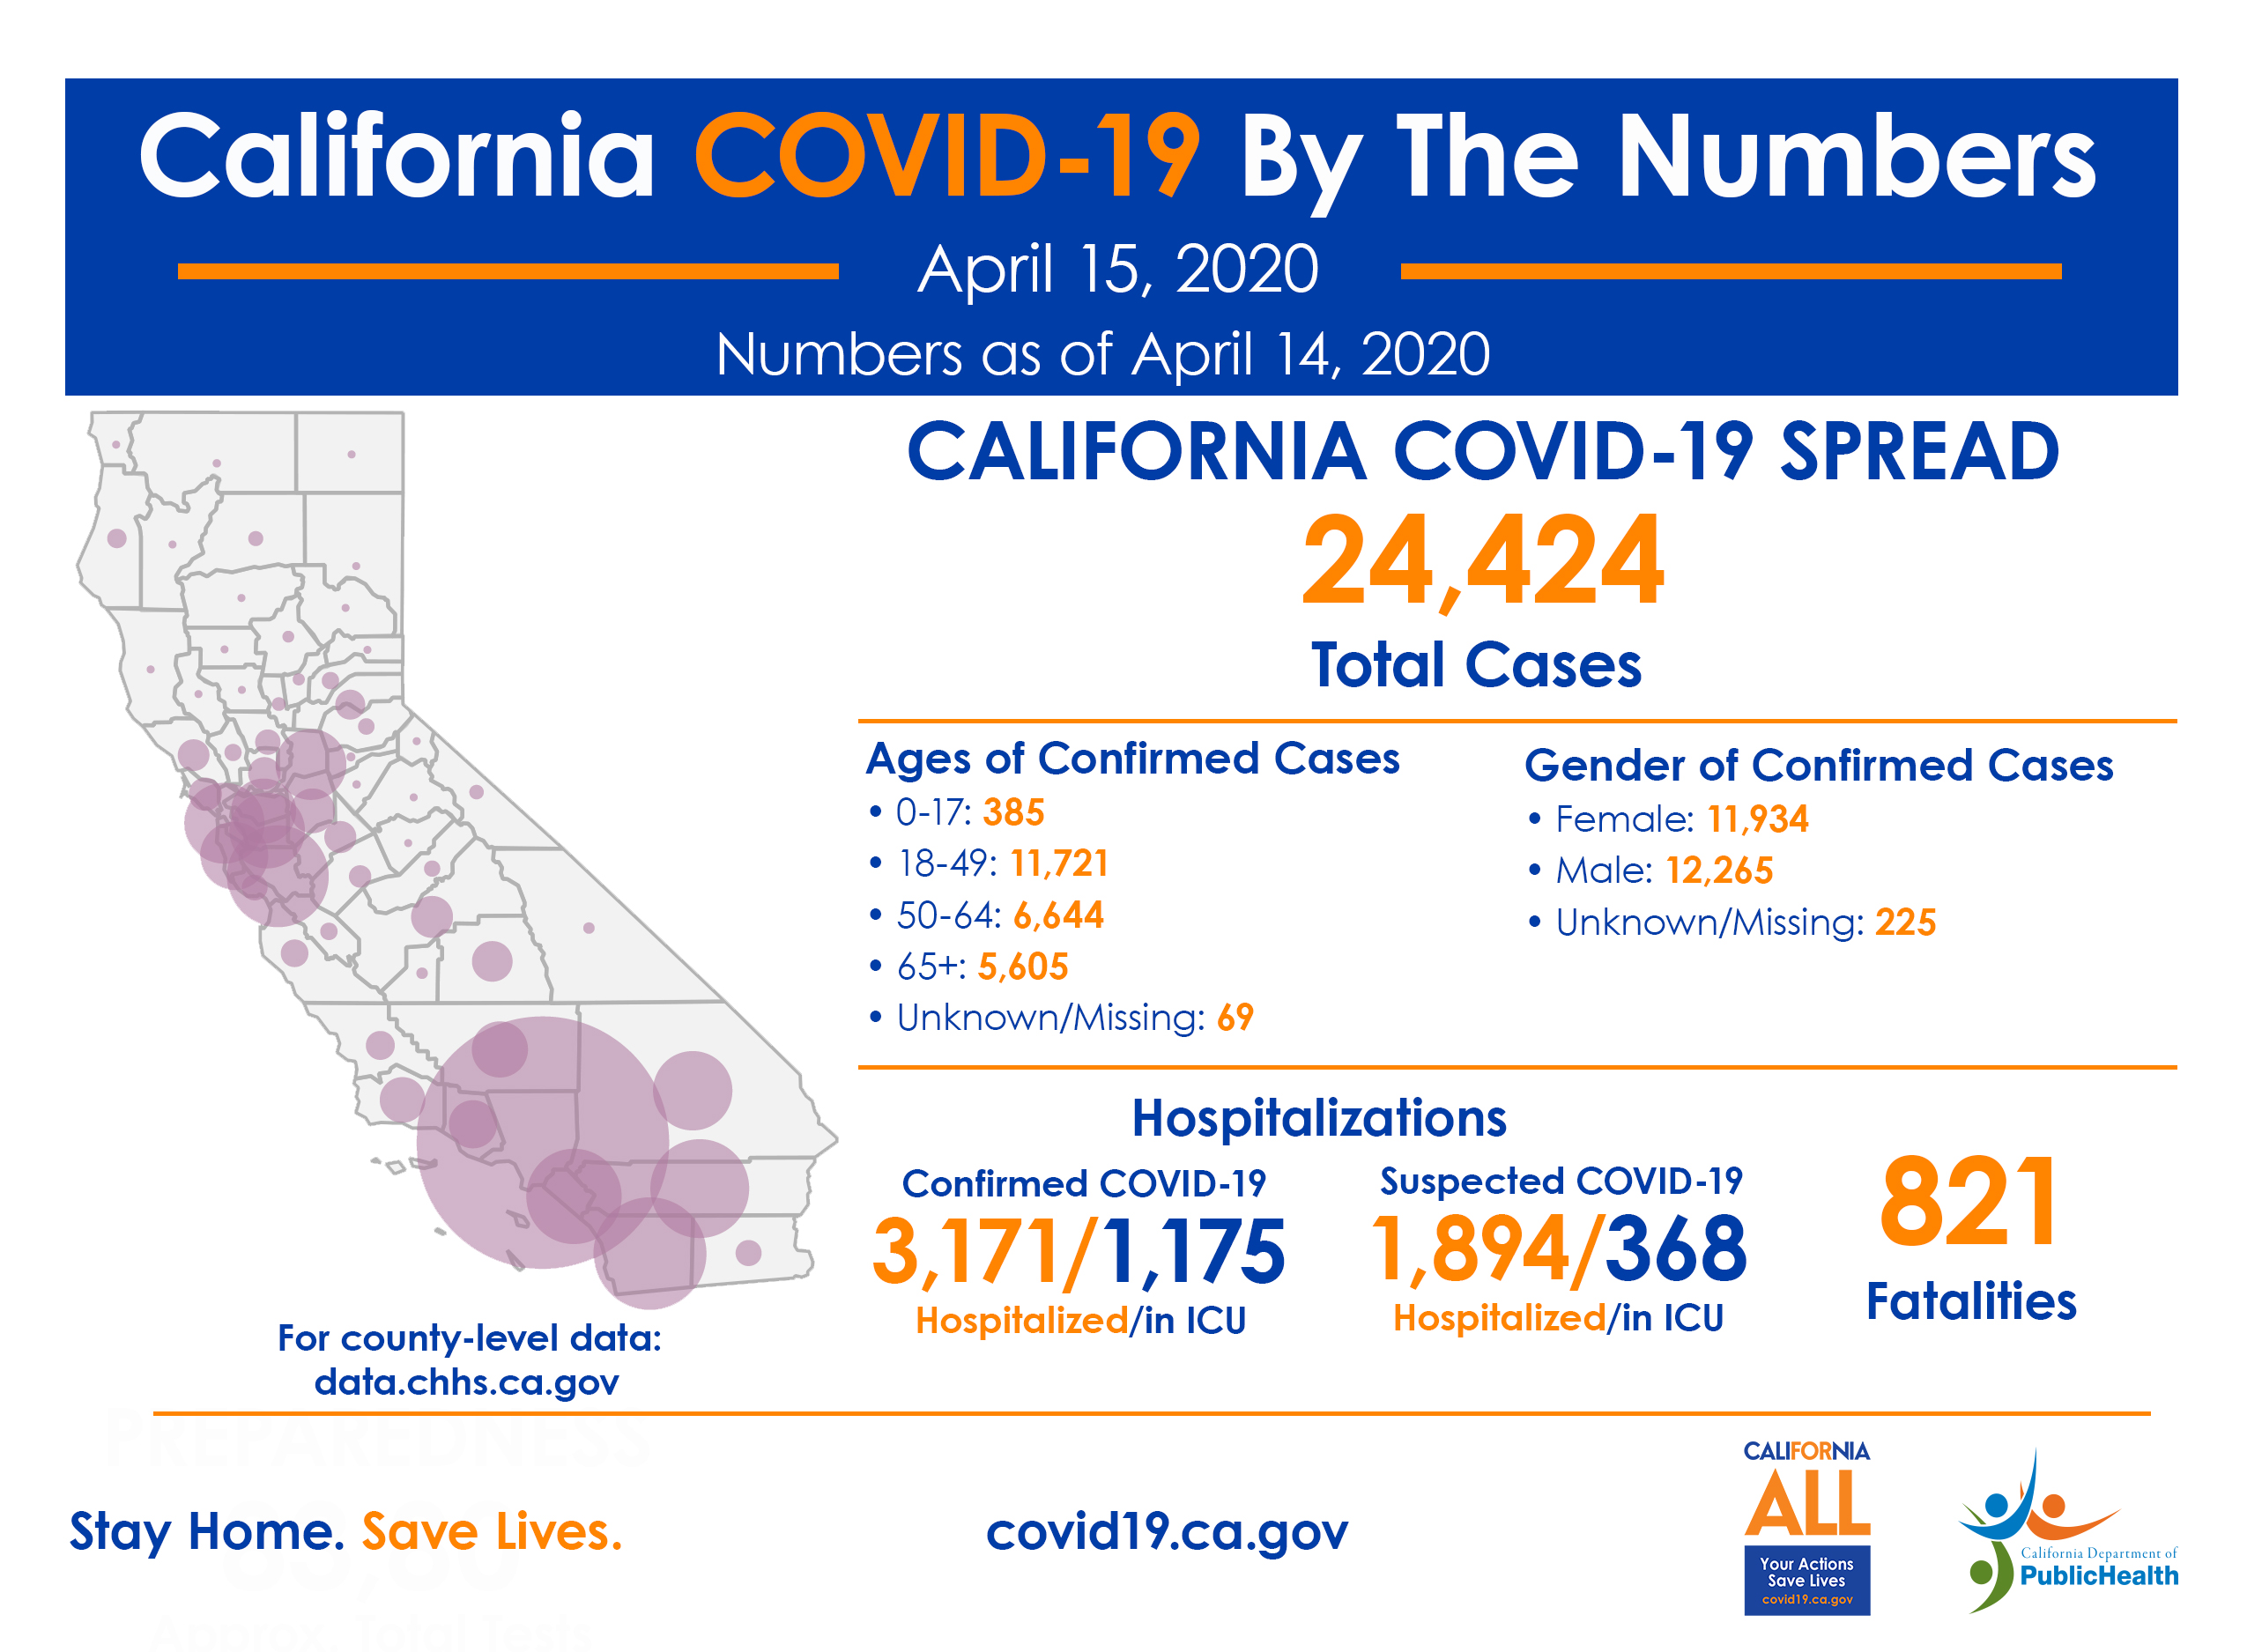 California COVID-19 by the Numbers as of April 14, 2020